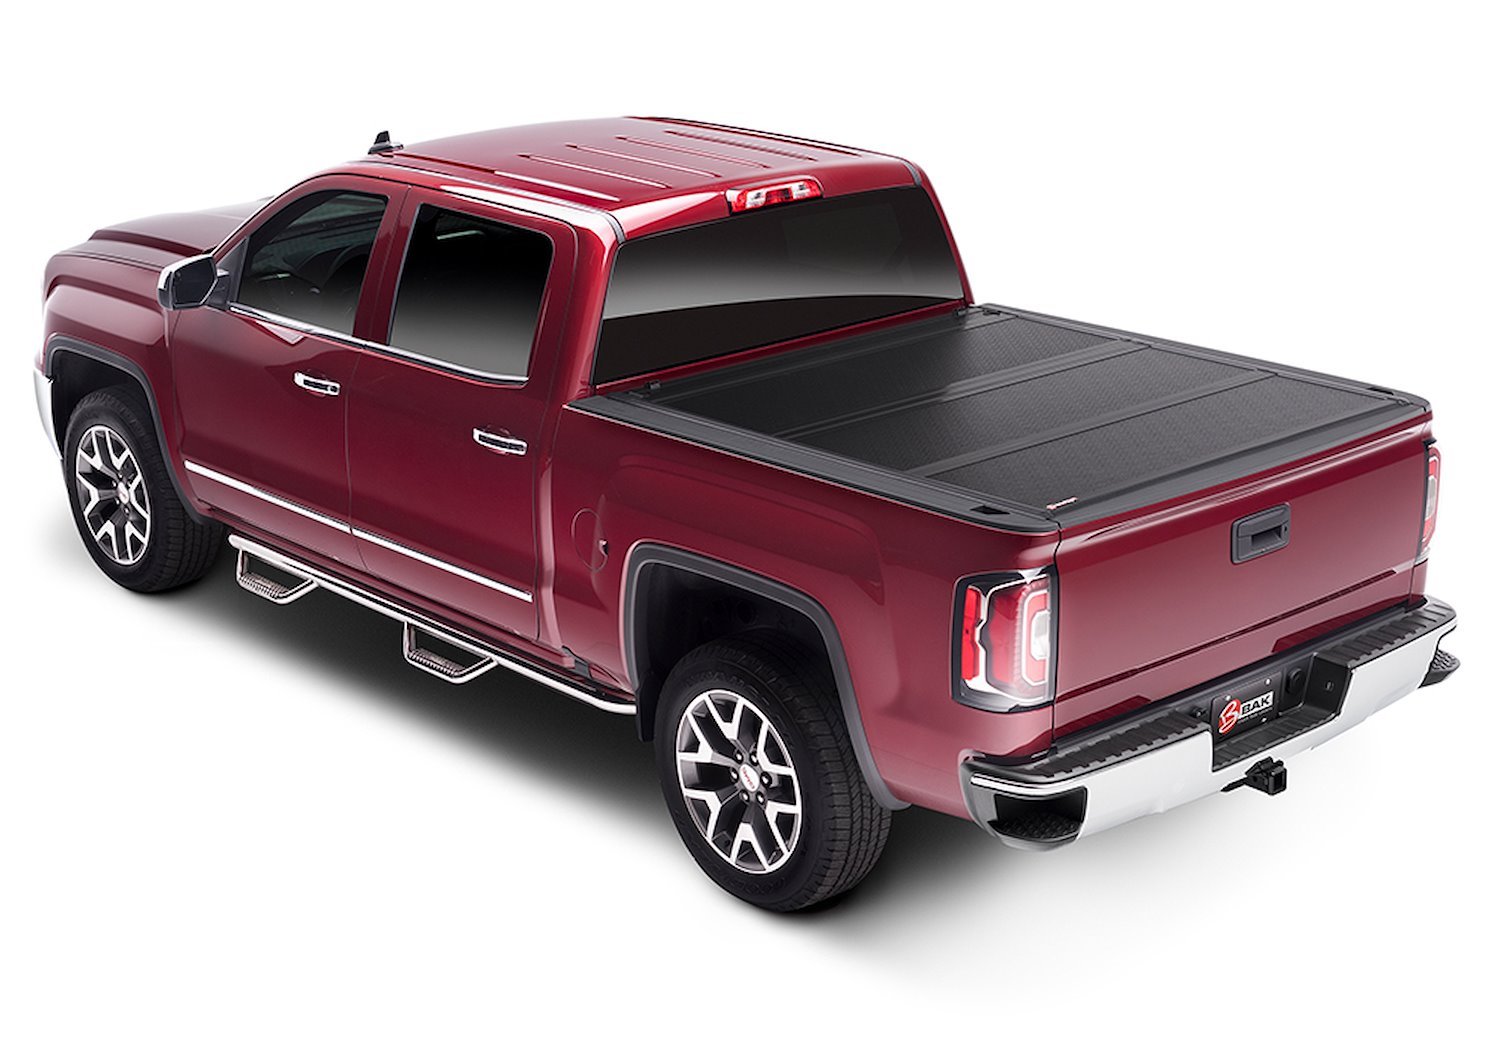 BAKFlip FiberMax Tonneau Cover Fits Select Dodge Ram without Ram Box (New Body Style 1500 Only), Bed Length: 6.4 ft.